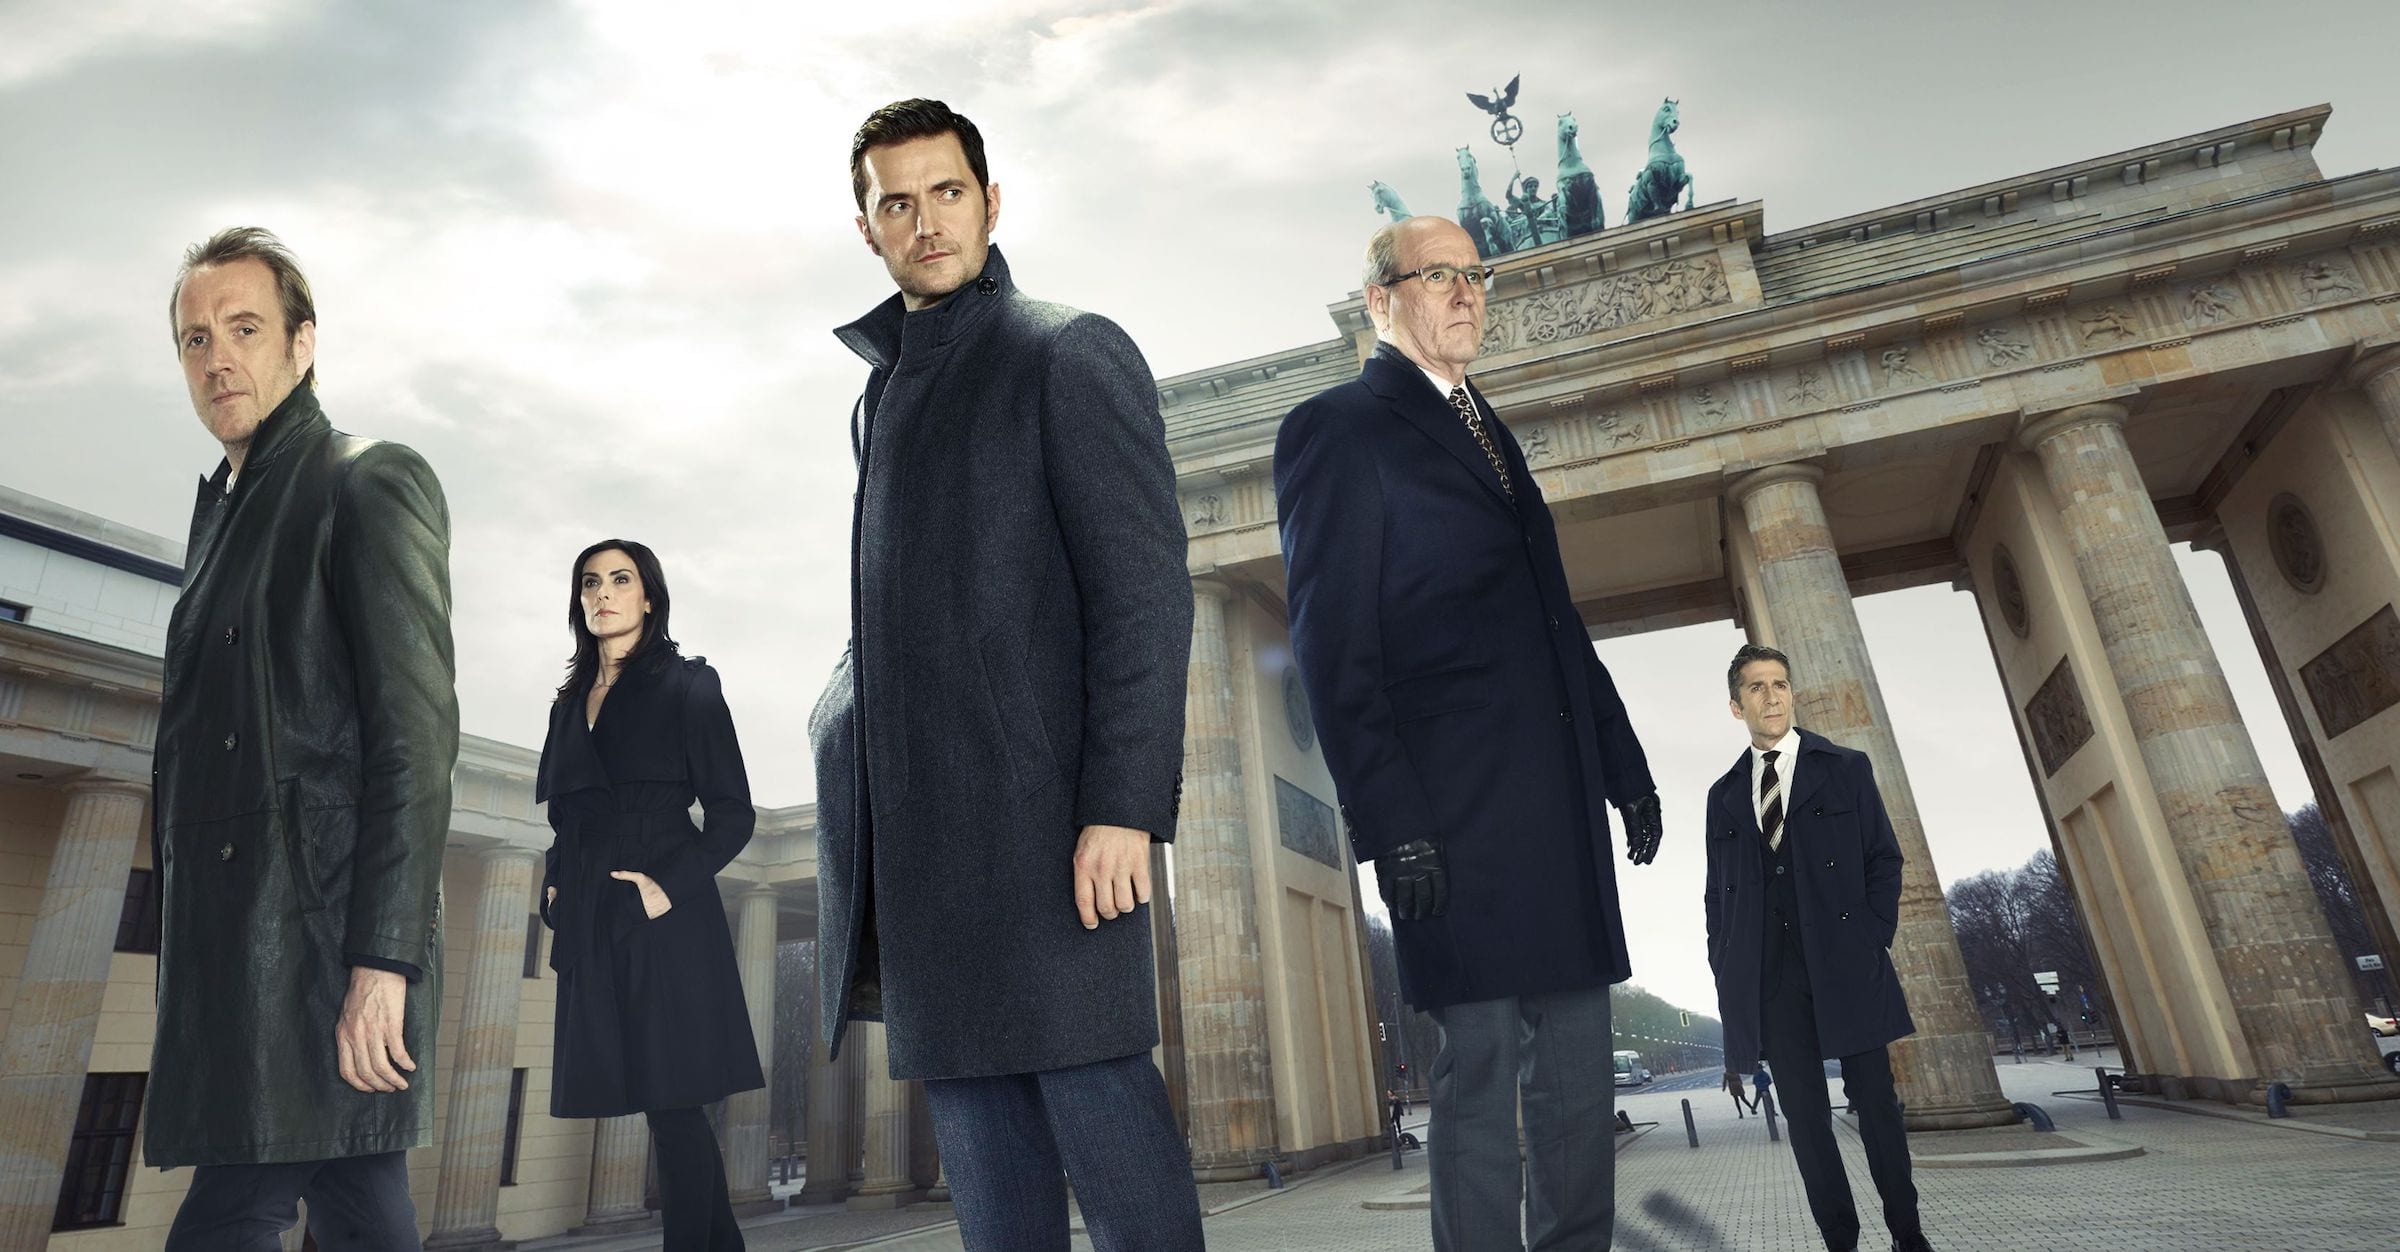 Richard Armitage (Ocean’s 8) stars as a CIA analyst who turns to a career of undercover work for the foreign station in Berlin.